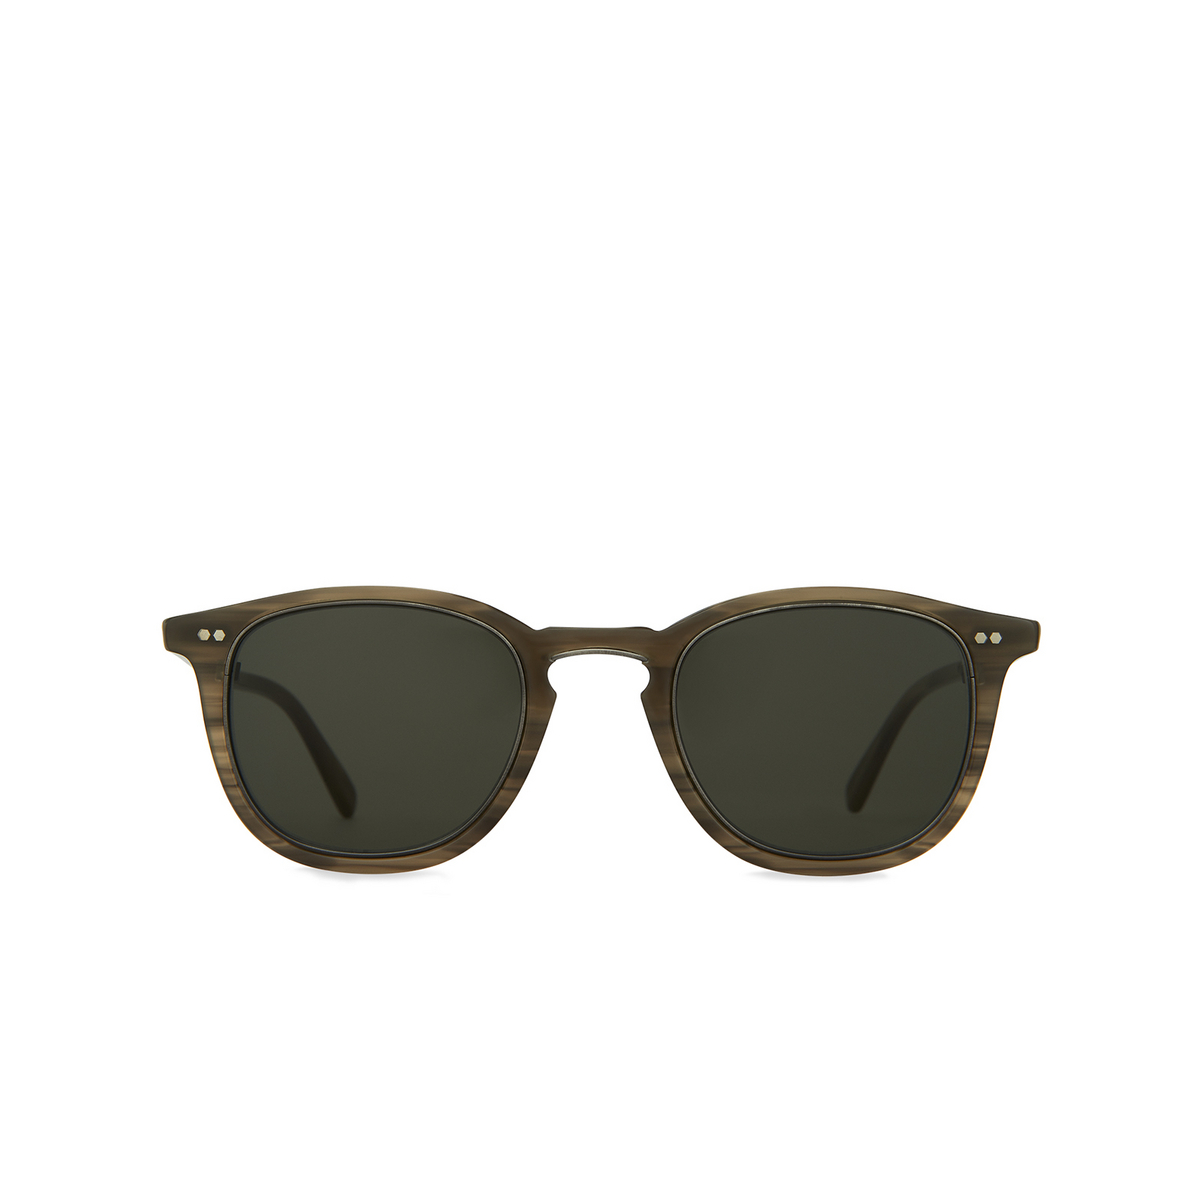 Mr. Leight® Square Sunglasses: Coopers S color Greywood - Pewter / G15 GW-PW/G15 - front view.